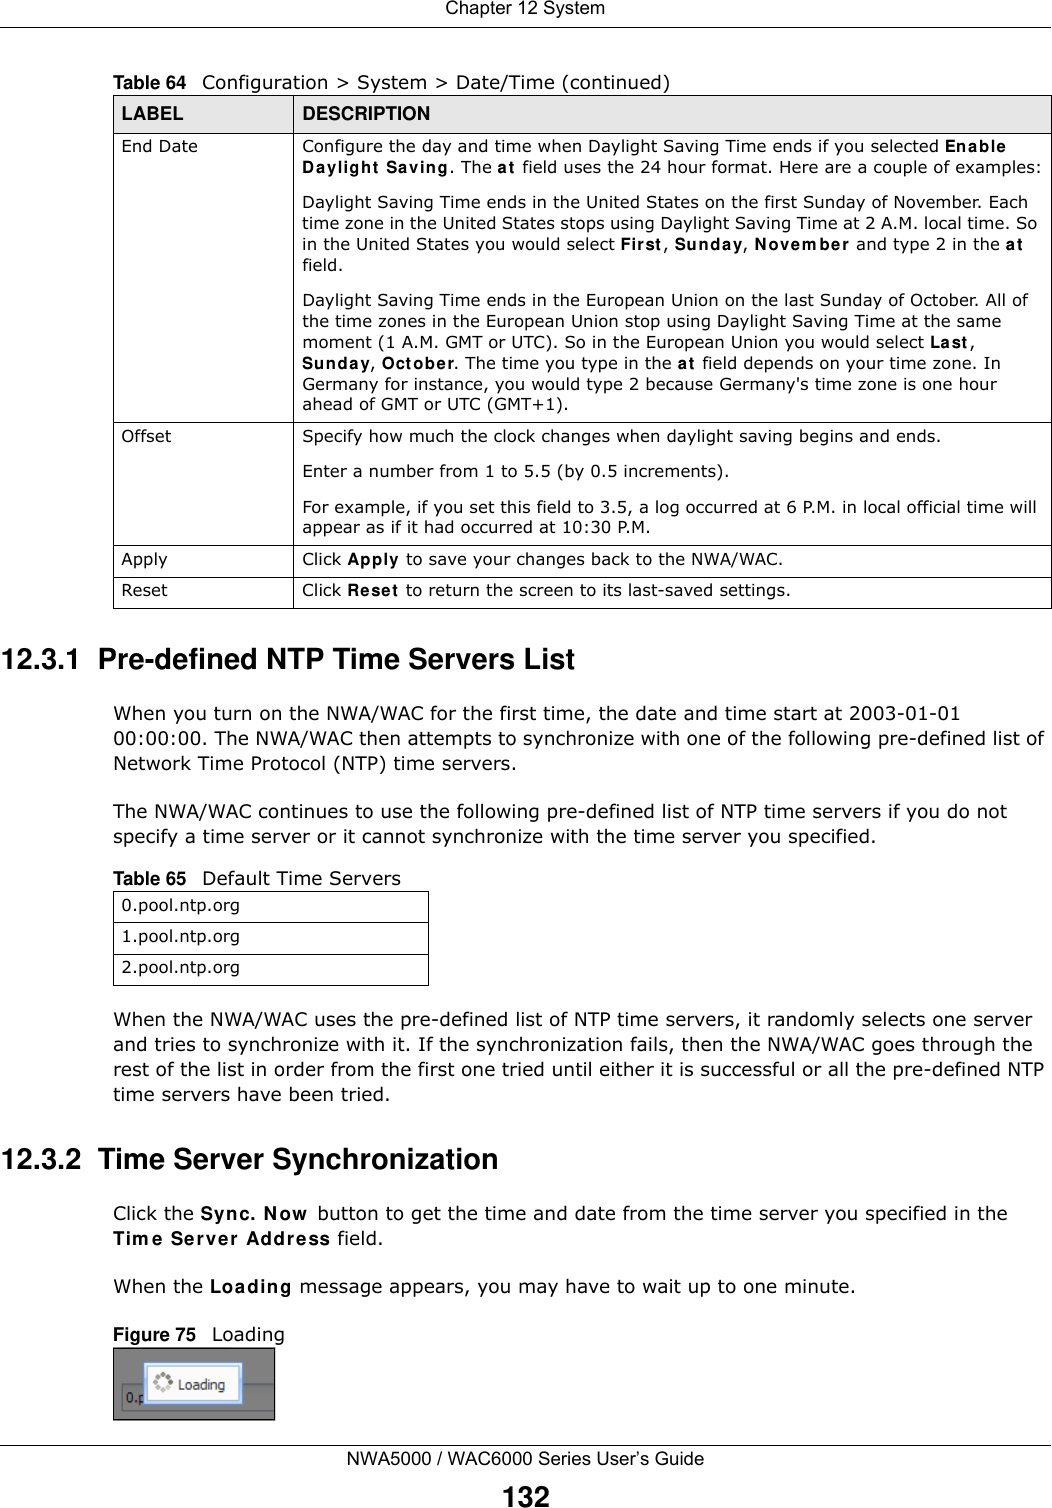 Chapter 12 SystemNWA5000 / WAC6000 Series User’s Guide13212.3.1  Pre-defined NTP Time Servers ListWhen you turn on the NWA/WAC for the first time, the date and time start at 2003-01-01 00:00:00. The NWA/WAC then attempts to synchronize with one of the following pre-defined list of Network Time Protocol (NTP) time servers.The NWA/WAC continues to use the following pre-defined list of NTP time servers if you do not specify a time server or it cannot synchronize with the time server you specified. When the NWA/WAC uses the pre-defined list of NTP time servers, it randomly selects one server and tries to synchronize with it. If the synchronization fails, then the NWA/WAC goes through the rest of the list in order from the first one tried until either it is successful or all the pre-defined NTP time servers have been tried.12.3.2  Time Server SynchronizationClick the Sync. Now button to get the time and date from the time server you specified in the Time Server Address field.When the Loading message appears, you may have to wait up to one minute.Figure 75   LoadingEnd Date Configure the day and time when Daylight Saving Time ends if you selected Enable Daylight Saving. The at field uses the 24 hour format. Here are a couple of examples:Daylight Saving Time ends in the United States on the first Sunday of November. Each time zone in the United States stops using Daylight Saving Time at 2 A.M. local time. So in the United States you would select First, Sunday, November and type 2 in the at field.Daylight Saving Time ends in the European Union on the last Sunday of October. All of the time zones in the European Union stop using Daylight Saving Time at the same moment (1 A.M. GMT or UTC). So in the European Union you would select Last, Sunday, October. The time you type in the at field depends on your time zone. In Germany for instance, you would type 2 because Germany&apos;s time zone is one hour ahead of GMT or UTC (GMT+1). Offset Specify how much the clock changes when daylight saving begins and ends. Enter a number from 1 to 5.5 (by 0.5 increments). For example, if you set this field to 3.5, a log occurred at 6 P.M. in local official time will appear as if it had occurred at 10:30 P.M.Apply Click Apply to save your changes back to the NWA/WAC.Reset Click Reset to return the screen to its last-saved settings. Table 64   Configuration &gt; System &gt; Date/Time (continued)LABEL DESCRIPTIONTable 65   Default Time Servers0.pool.ntp.org1.pool.ntp.org2.pool.ntp.org